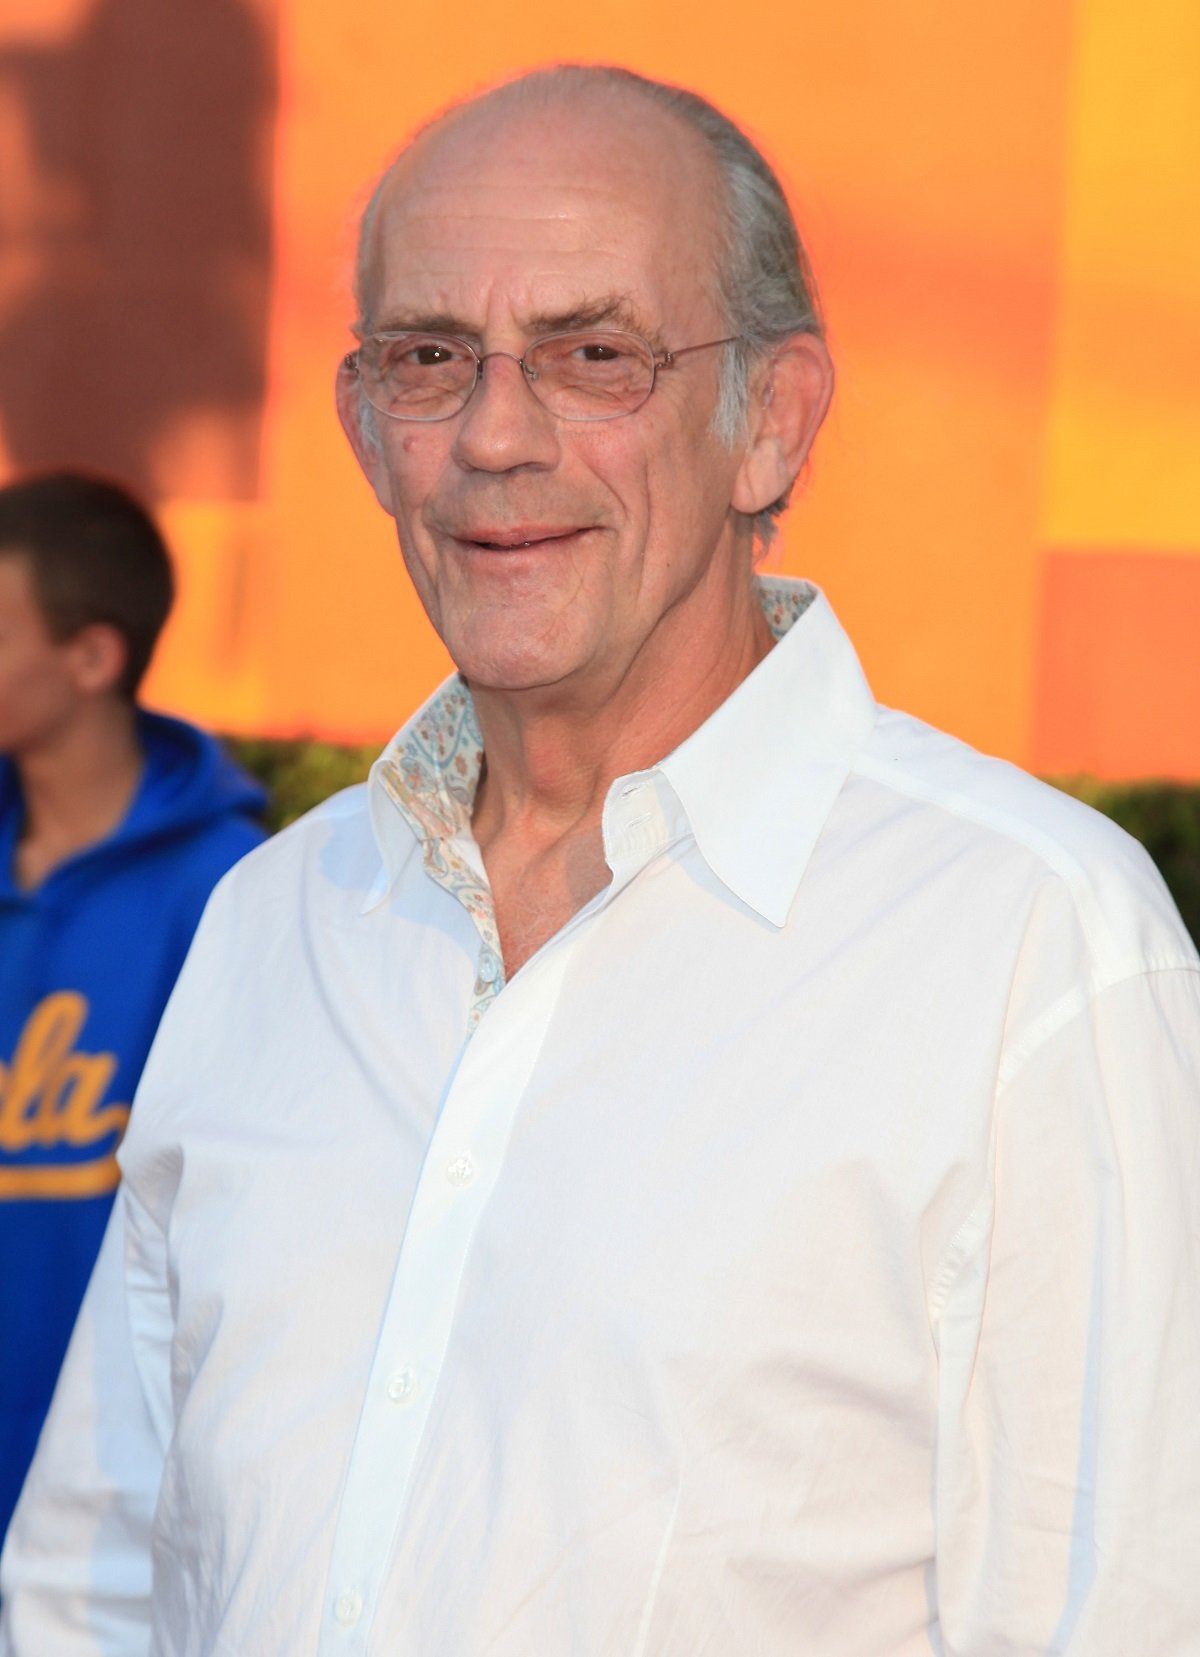 Christopher Lloyd, who played Professor Plum in 'Clue' 